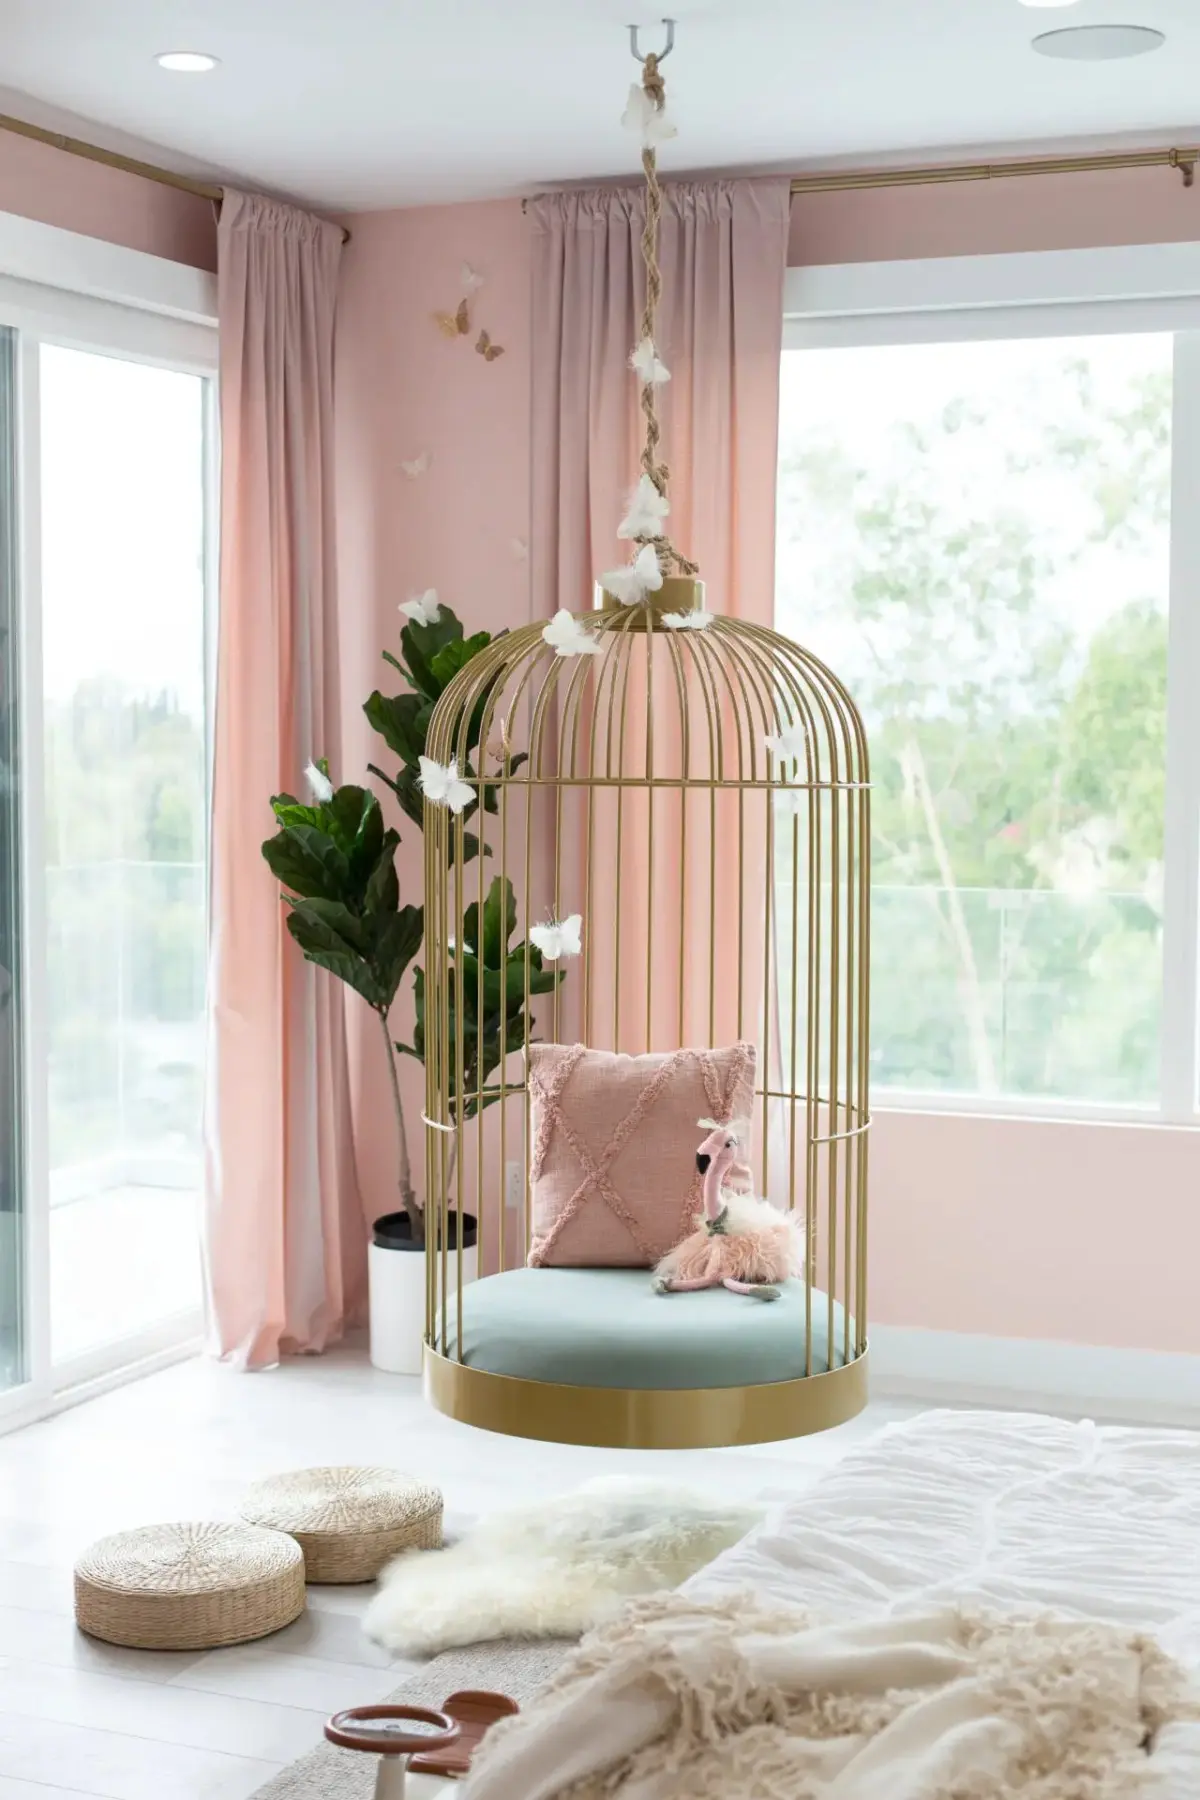 Room with a hanging birdcage chair decorated with pillows and a toy. Pink curtains, potted plant, and large windows in the background create an elegant atmosphere. Beige and white floor cushions in the foreground complete one of the 17 Pink Bedrooms Fit for a Princess.